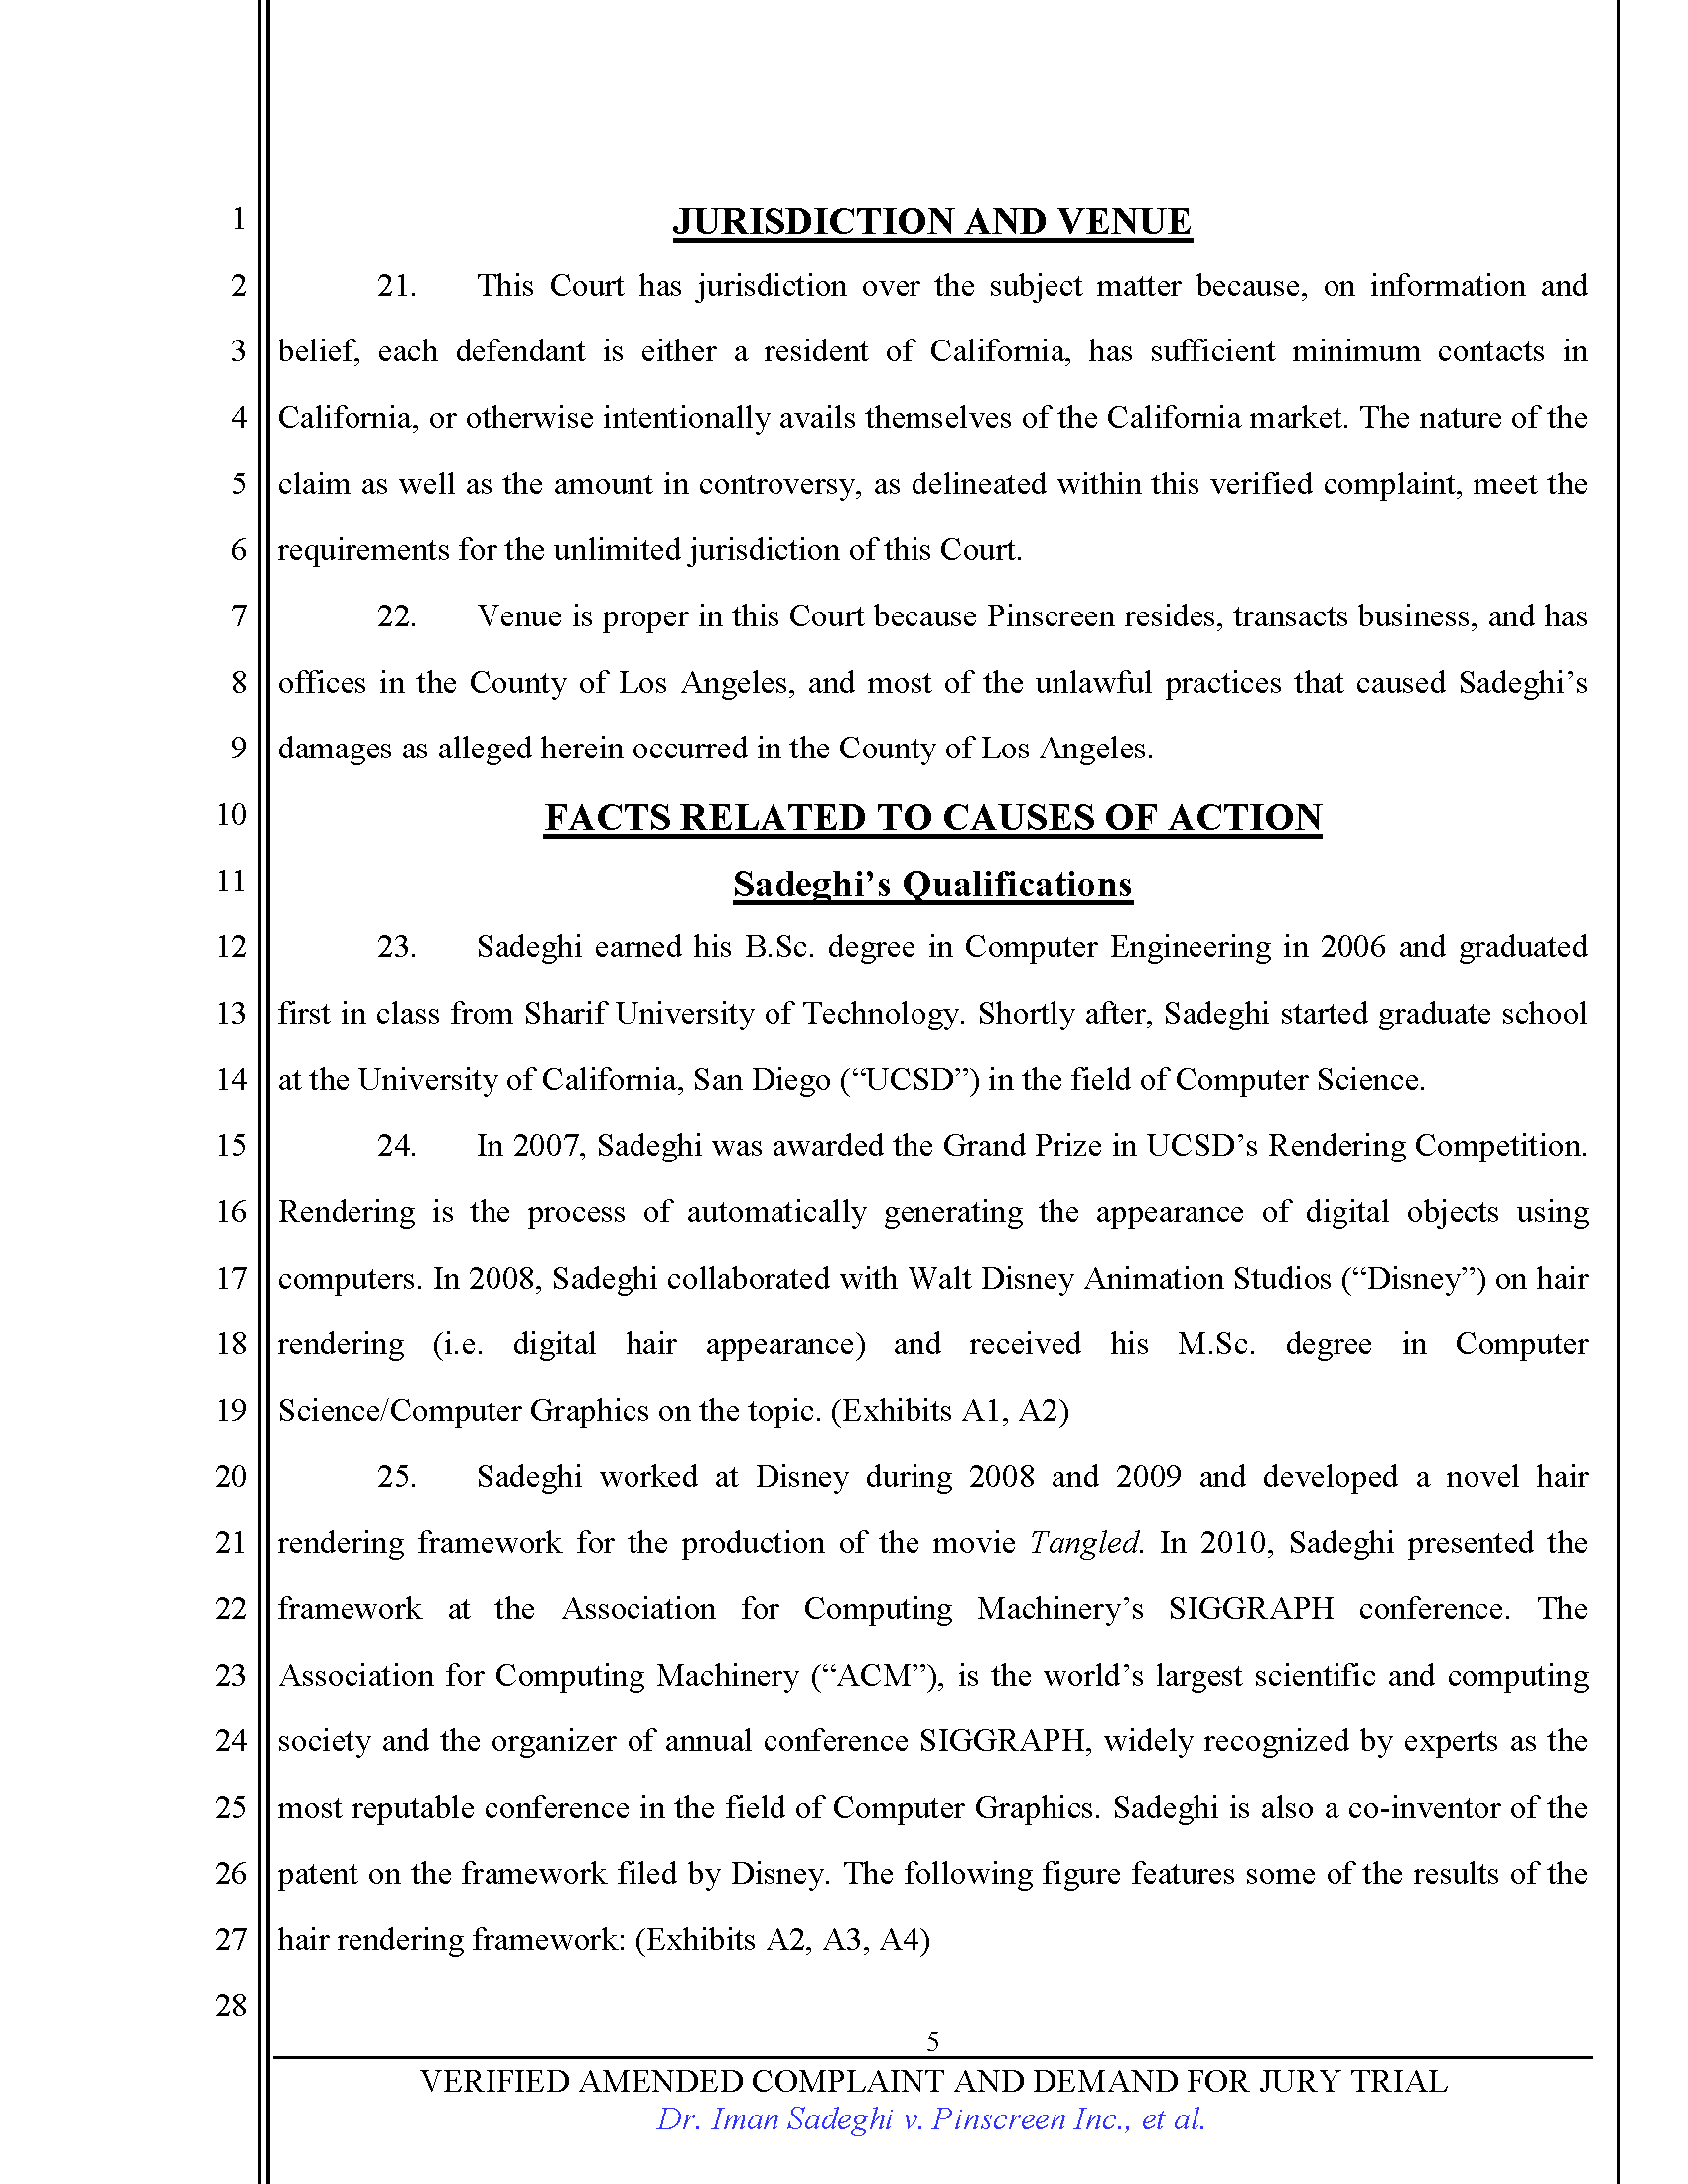 First Amended Complaint (FAC) Page 5